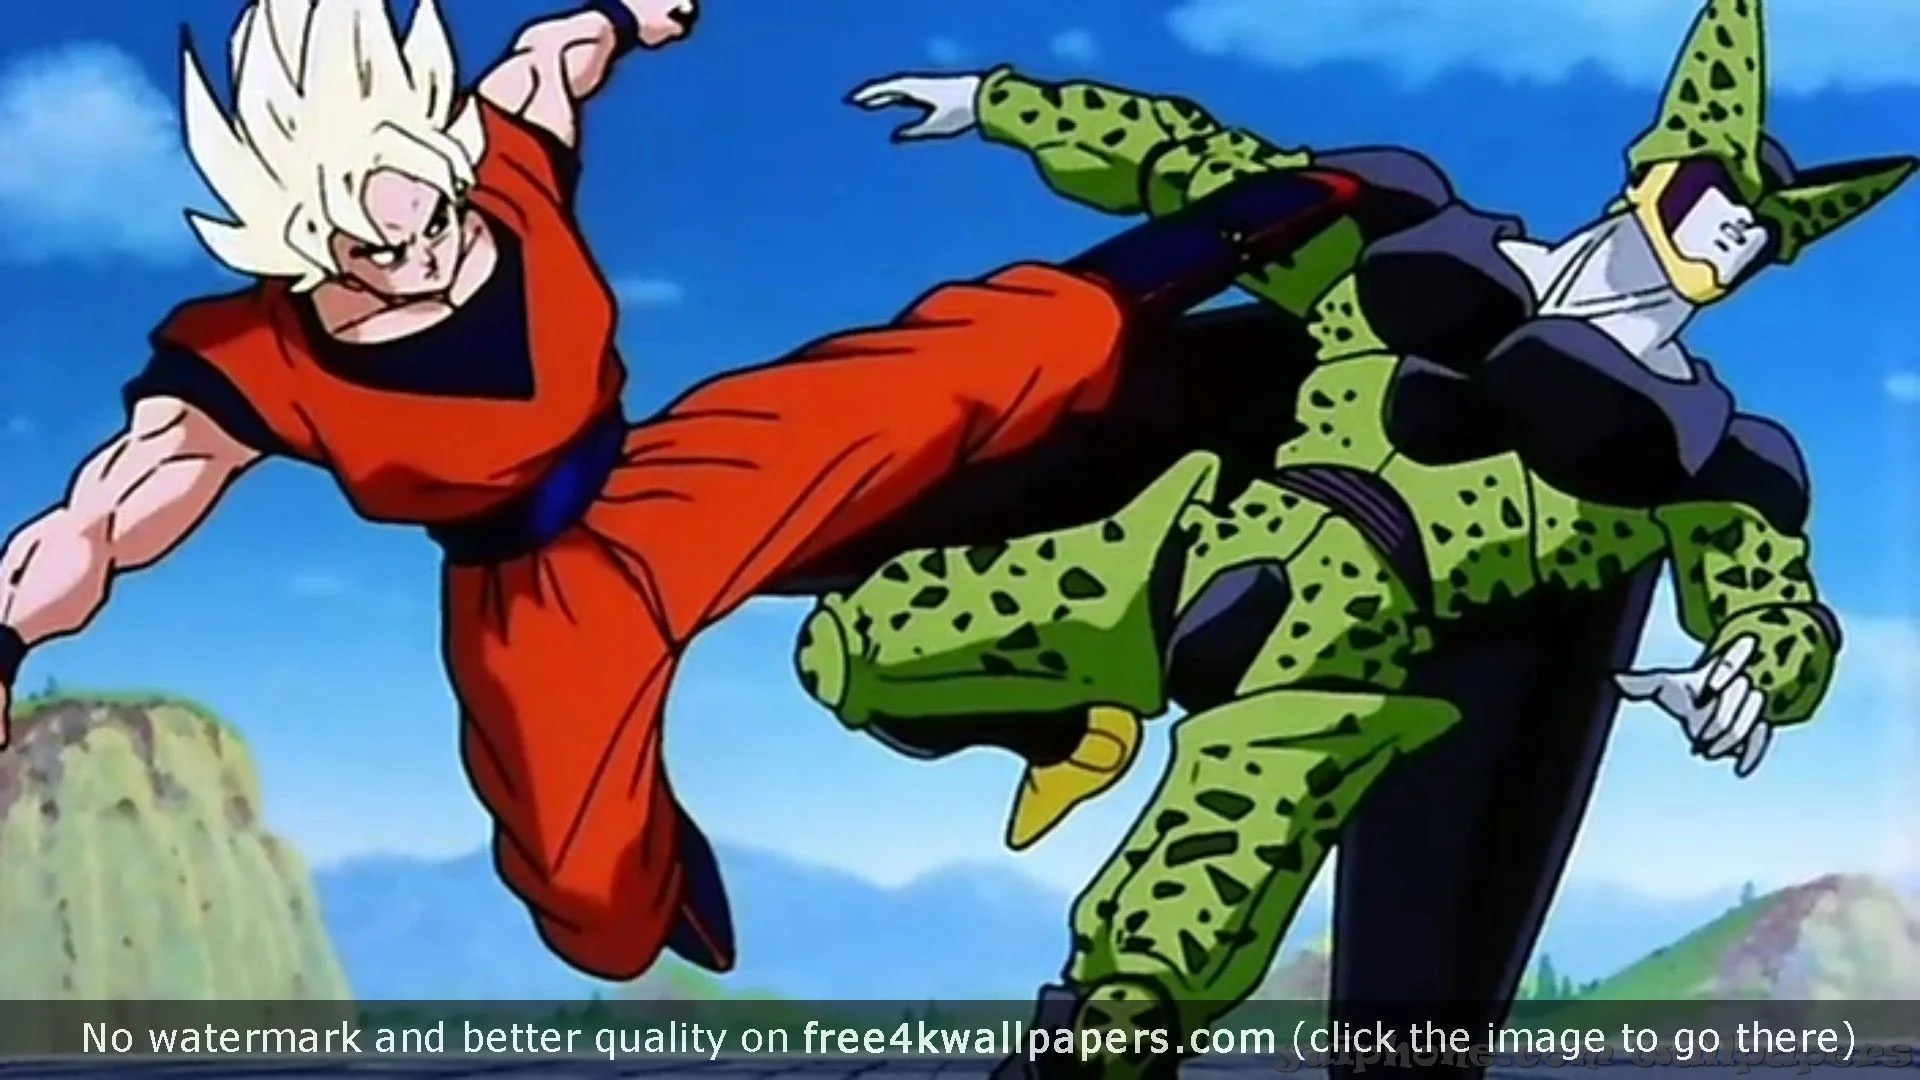 Cell Vs Goku Dragon Ball Z Backgrounds and S 4K or HD wallpaper .